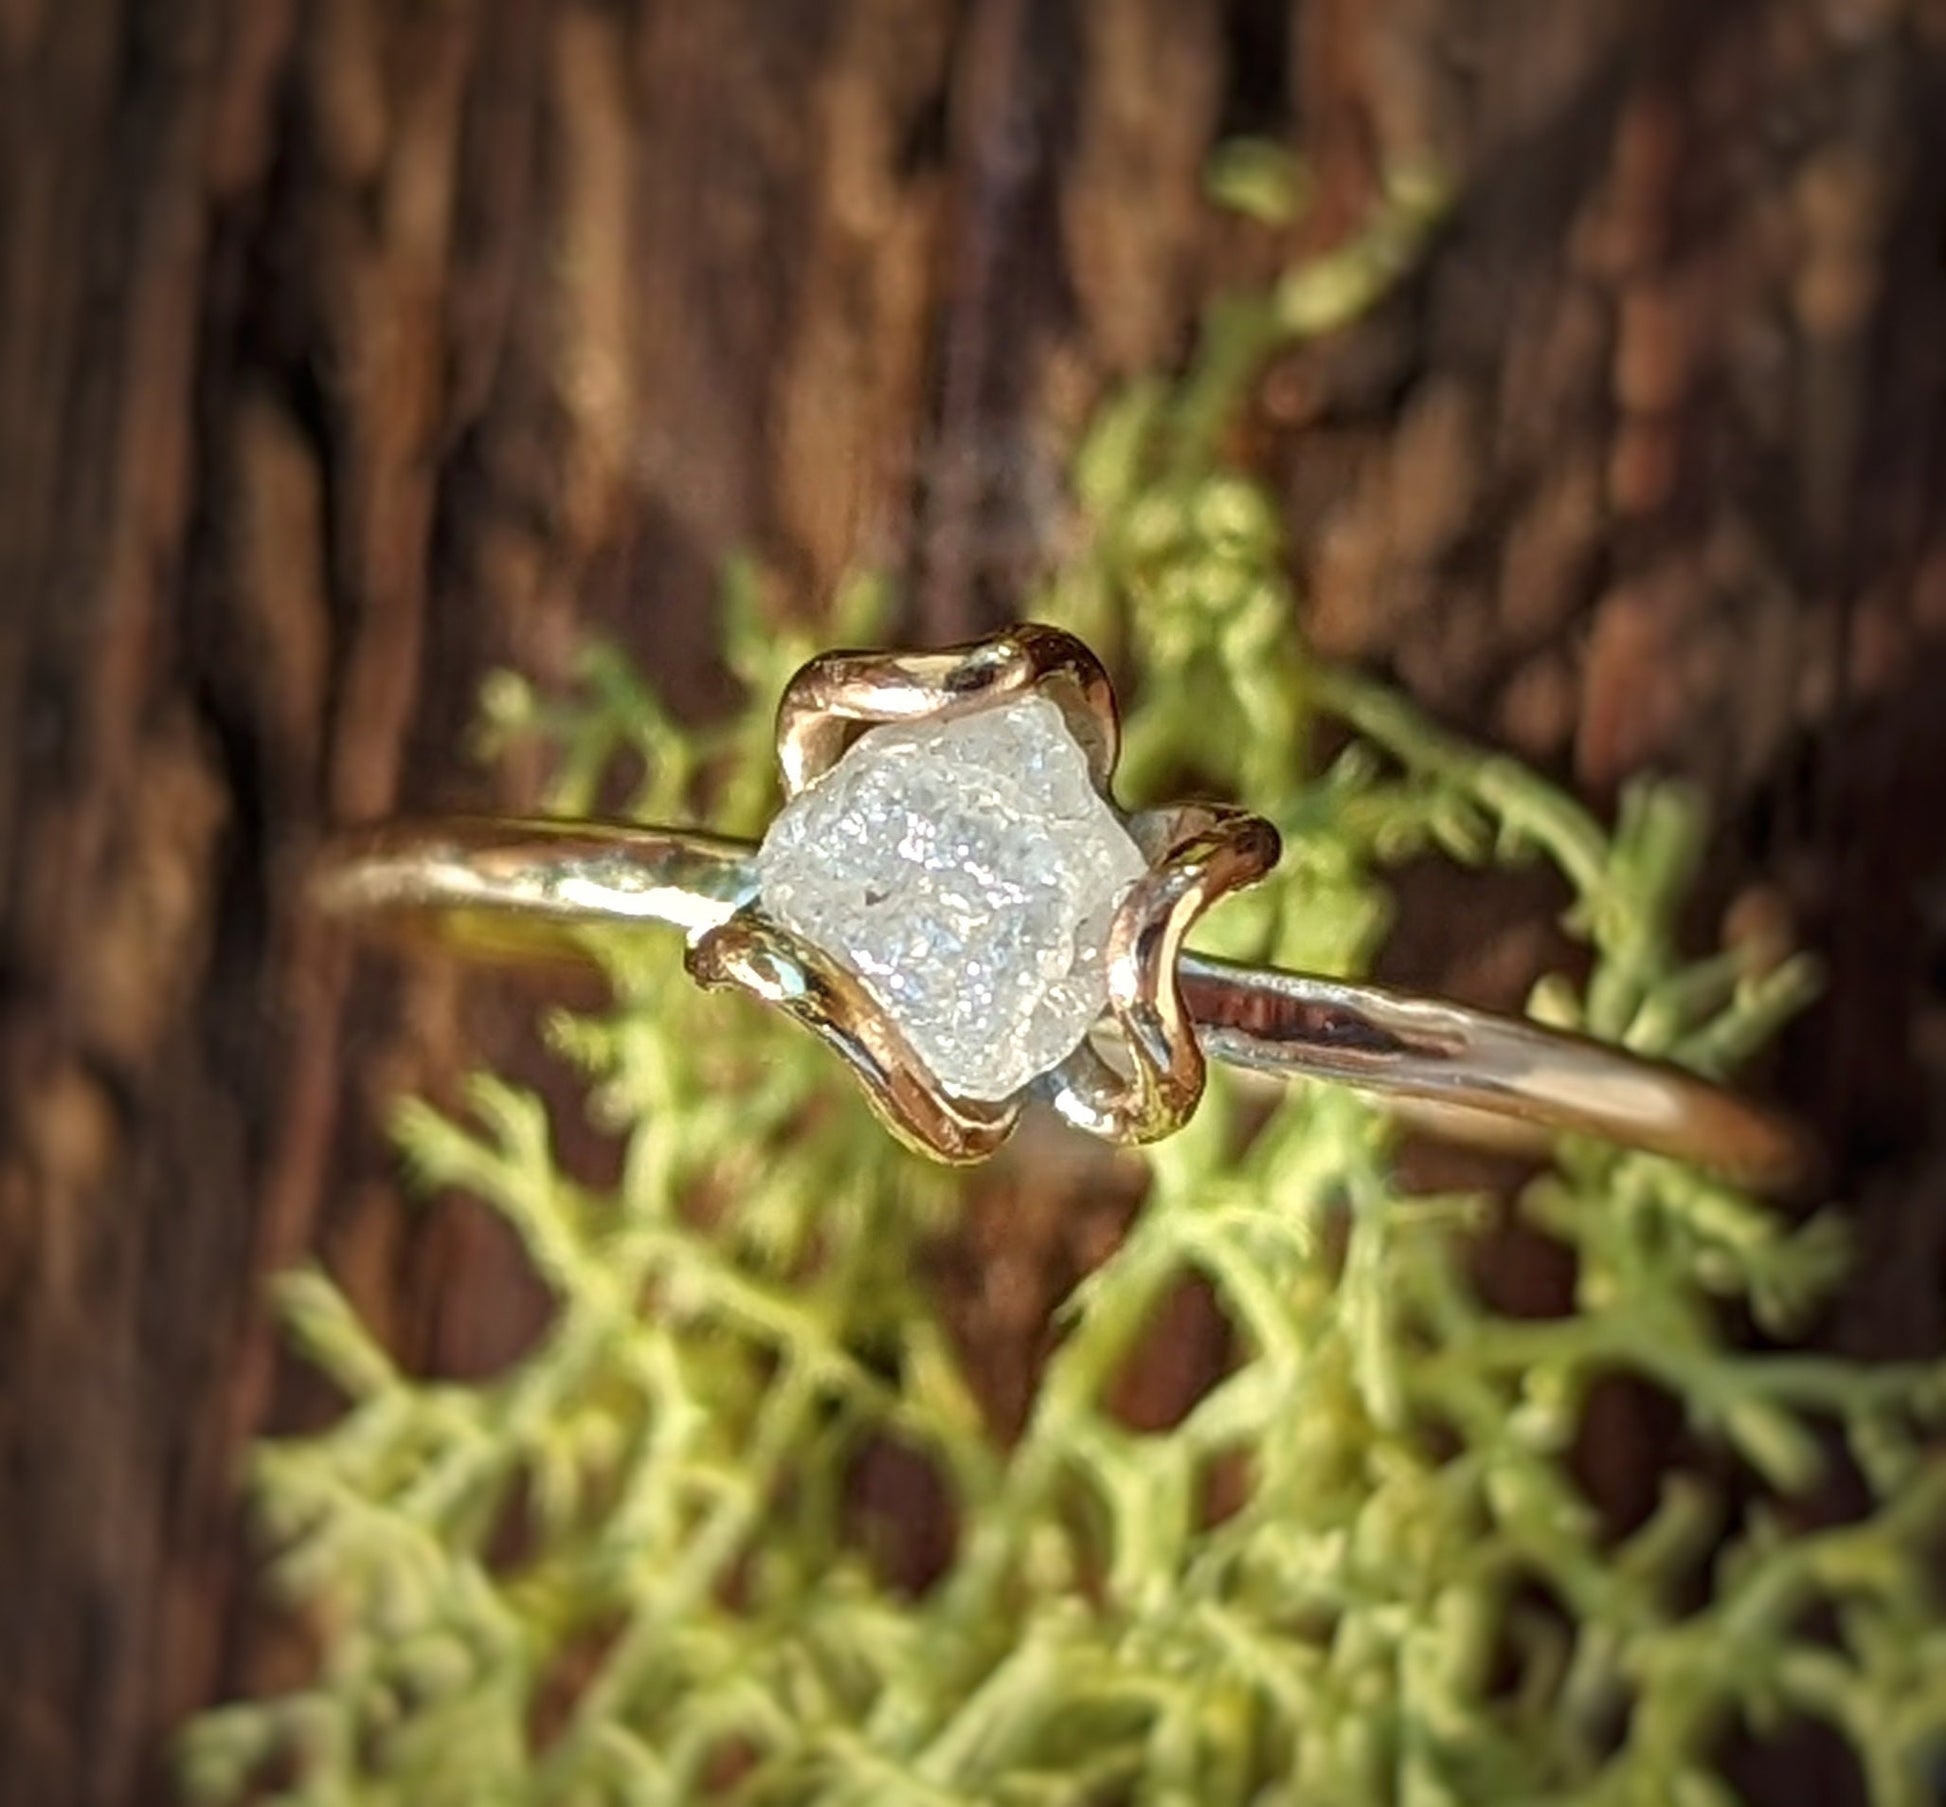 Raw diamond Solitaire Engagement ring in 18k Gold Flower Prong setting